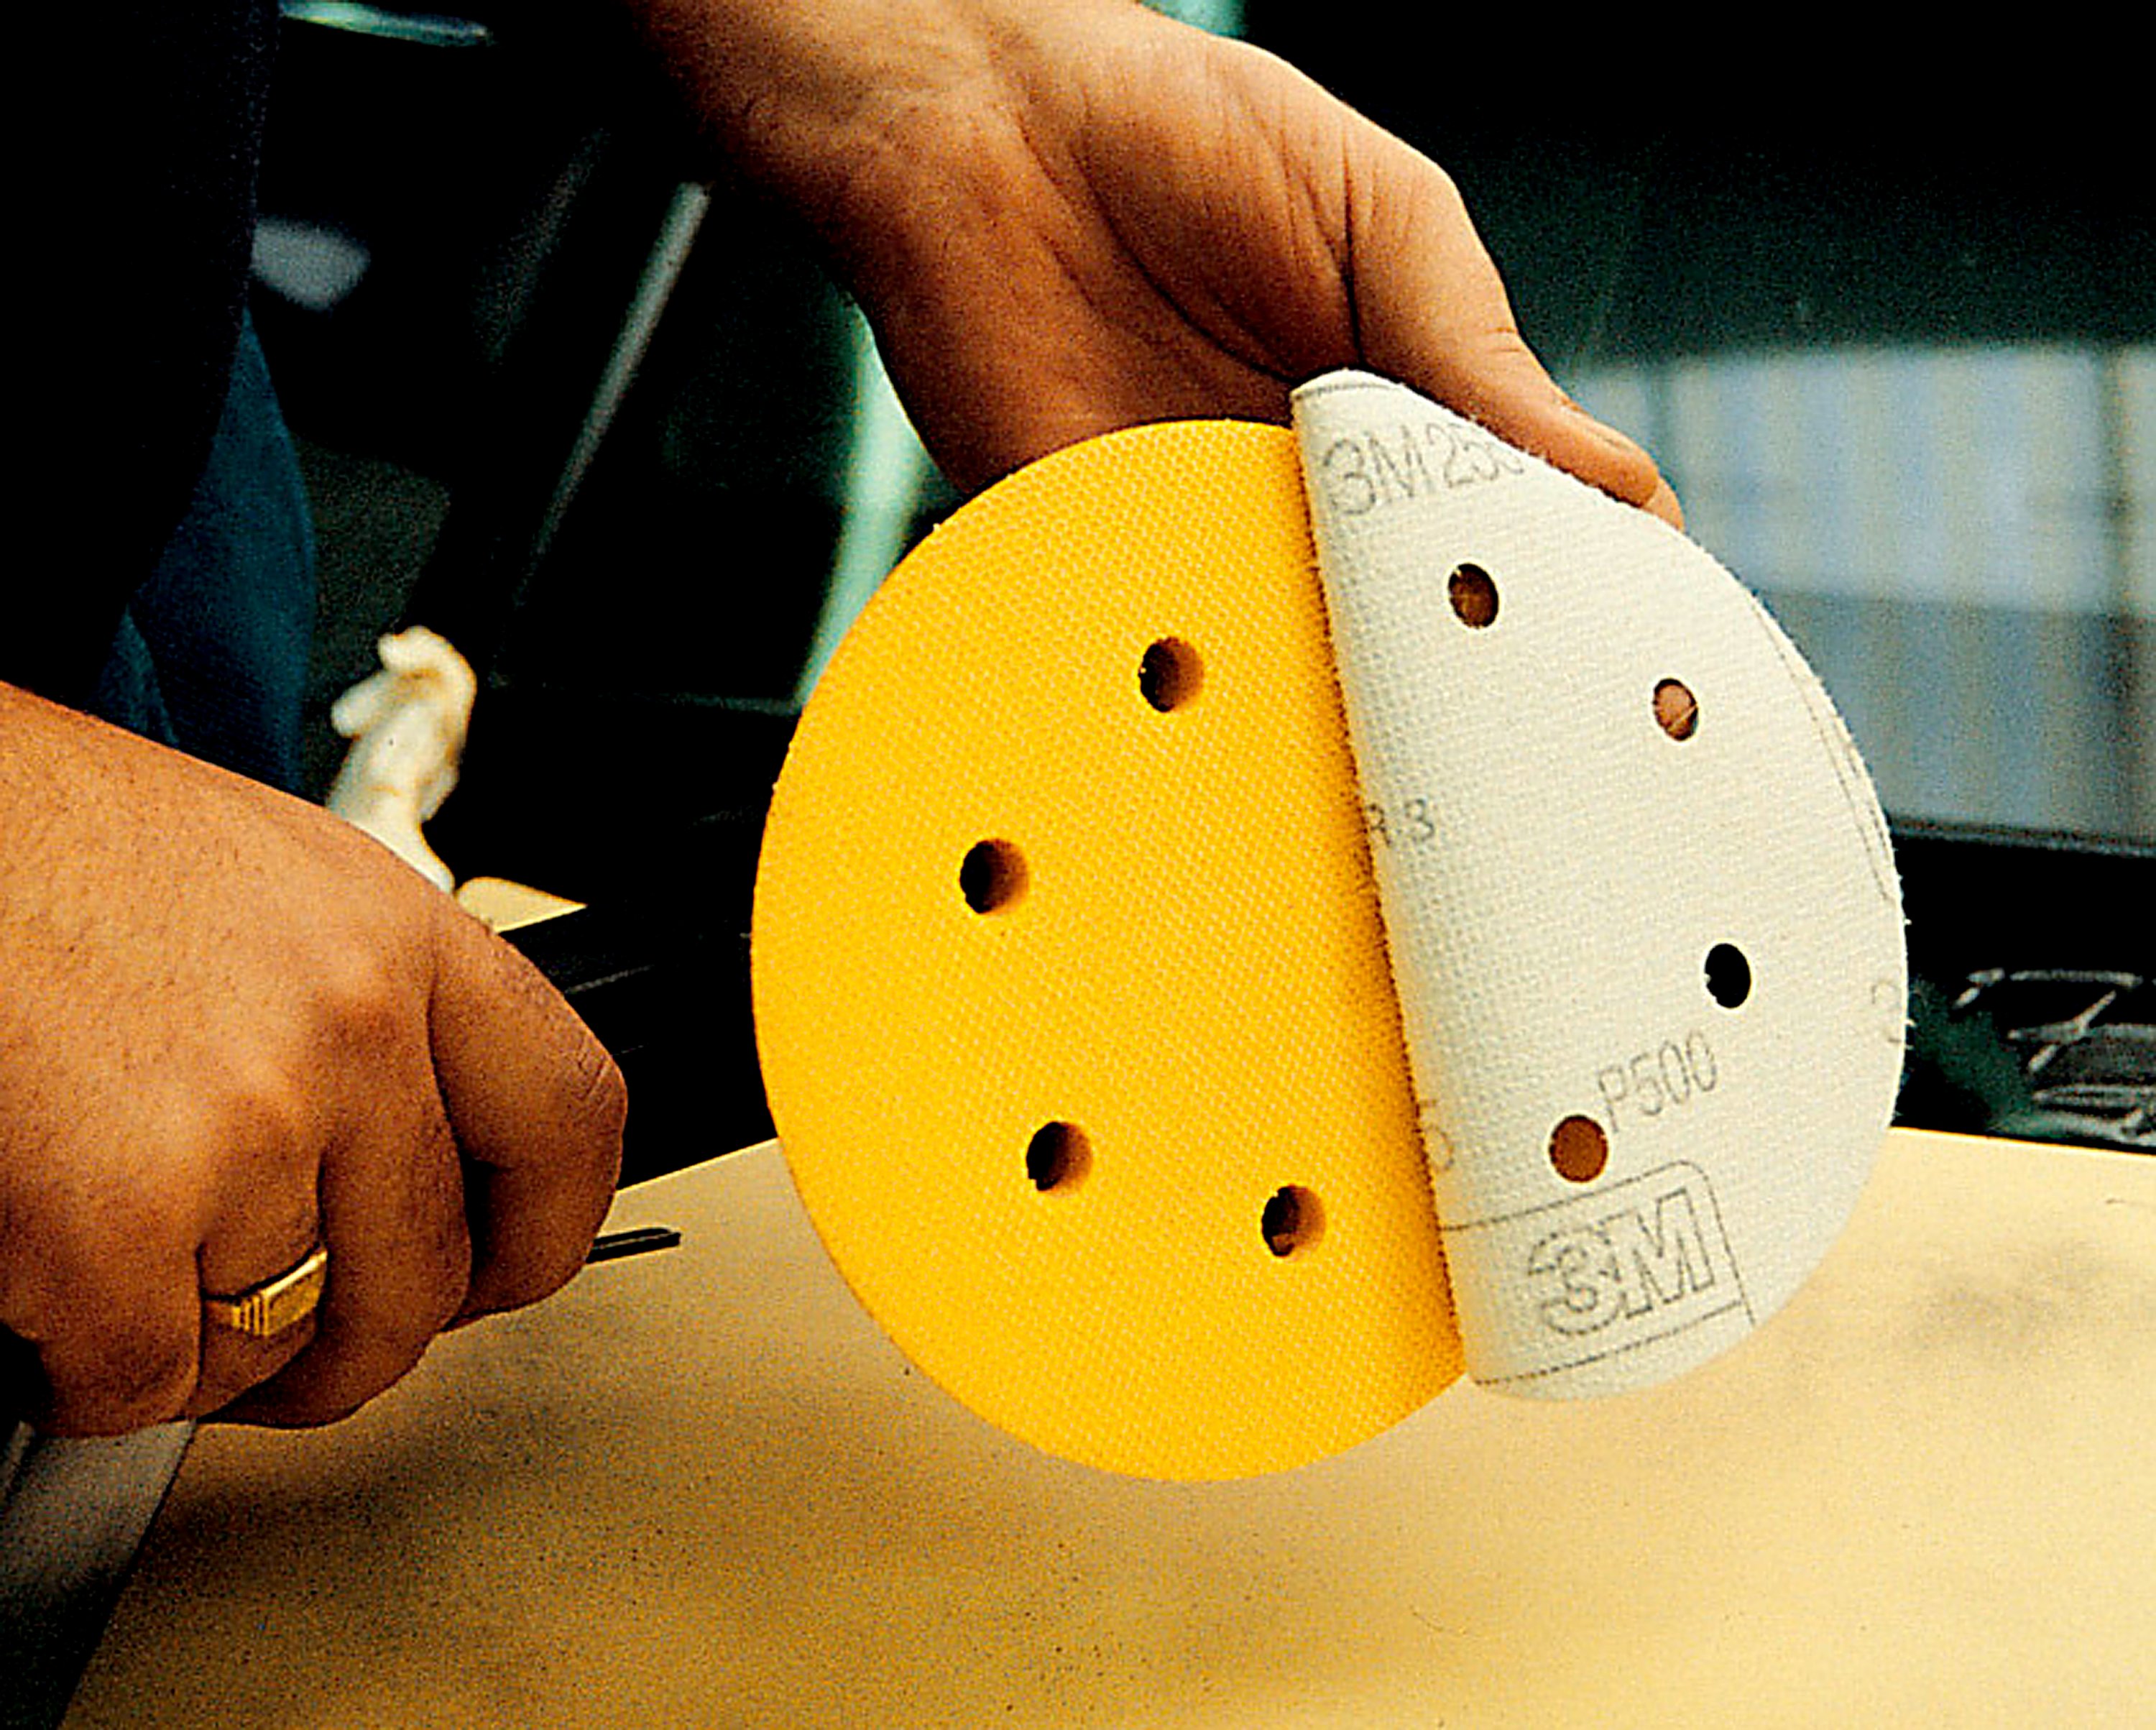 Cubitron™ II Hookit™ Clean Sanding Abrasive Discs 737U features 3M™ Precision-Shaped Grain technology - triangular-shaped, electrostatically oriented grains form sharp peaks, each acting like an individual cutting tool that slices through paint and body filler.